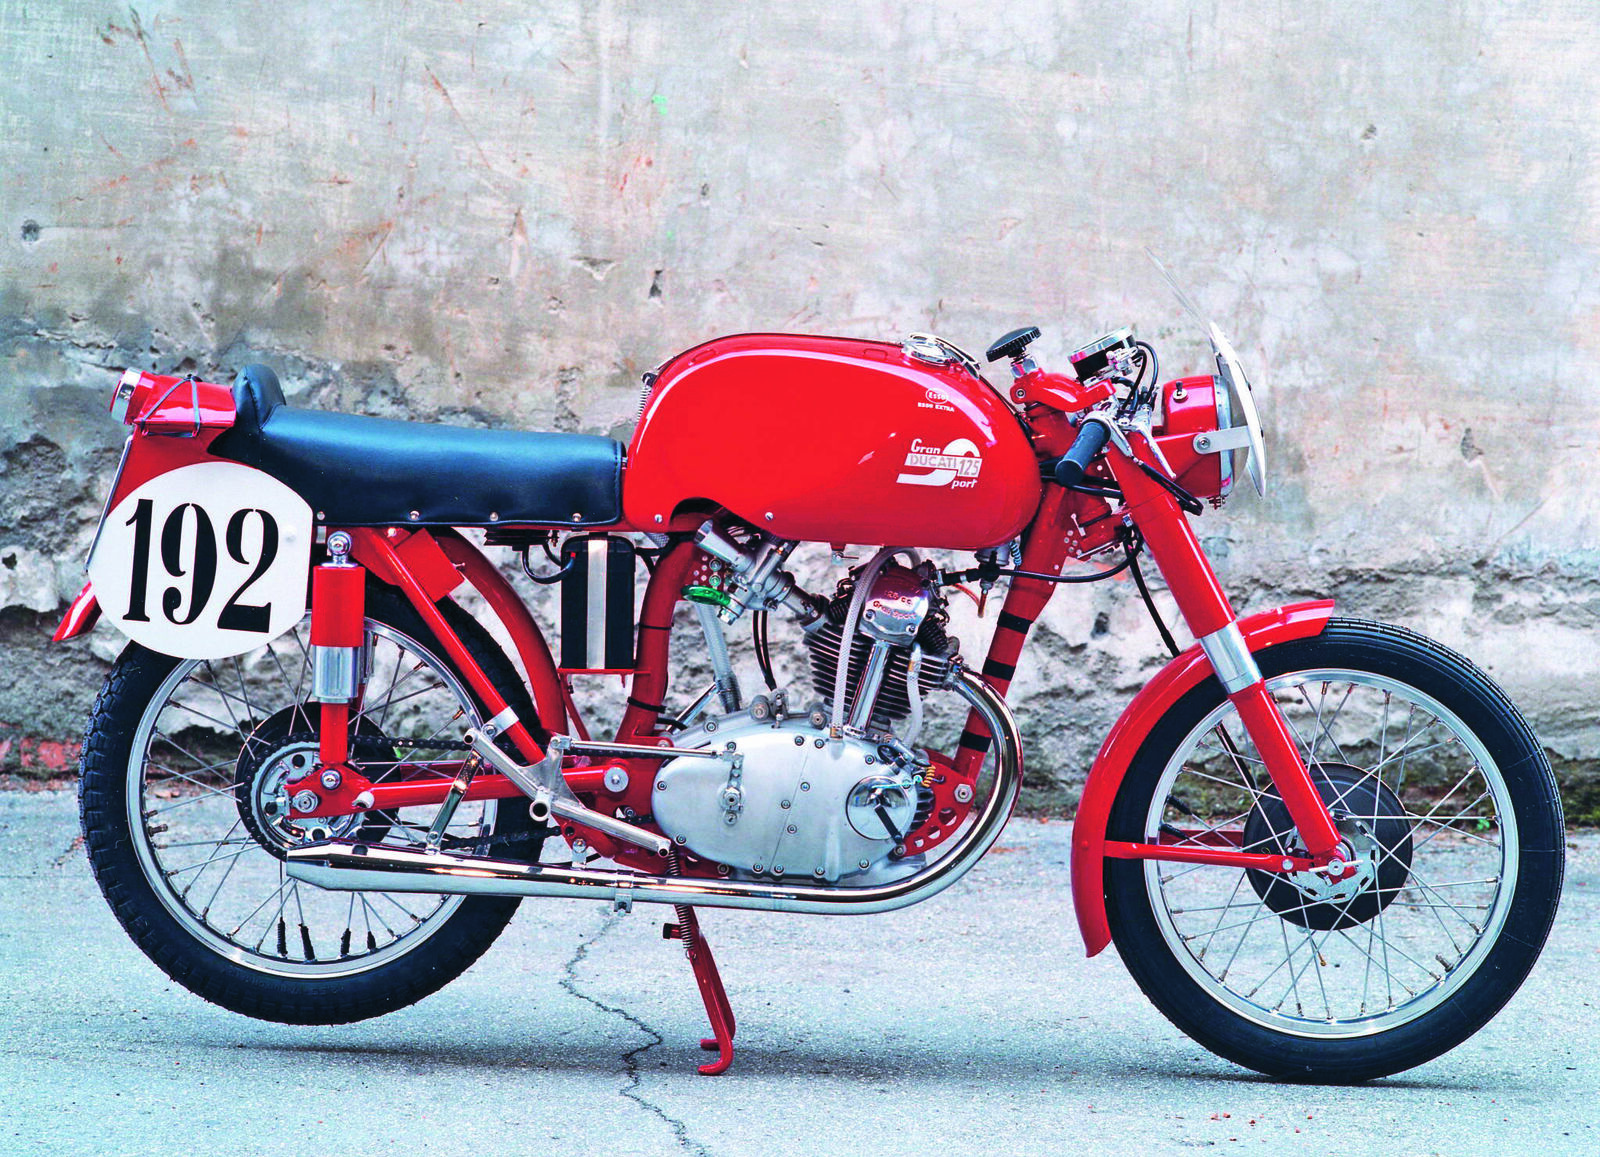 The History of Ducati